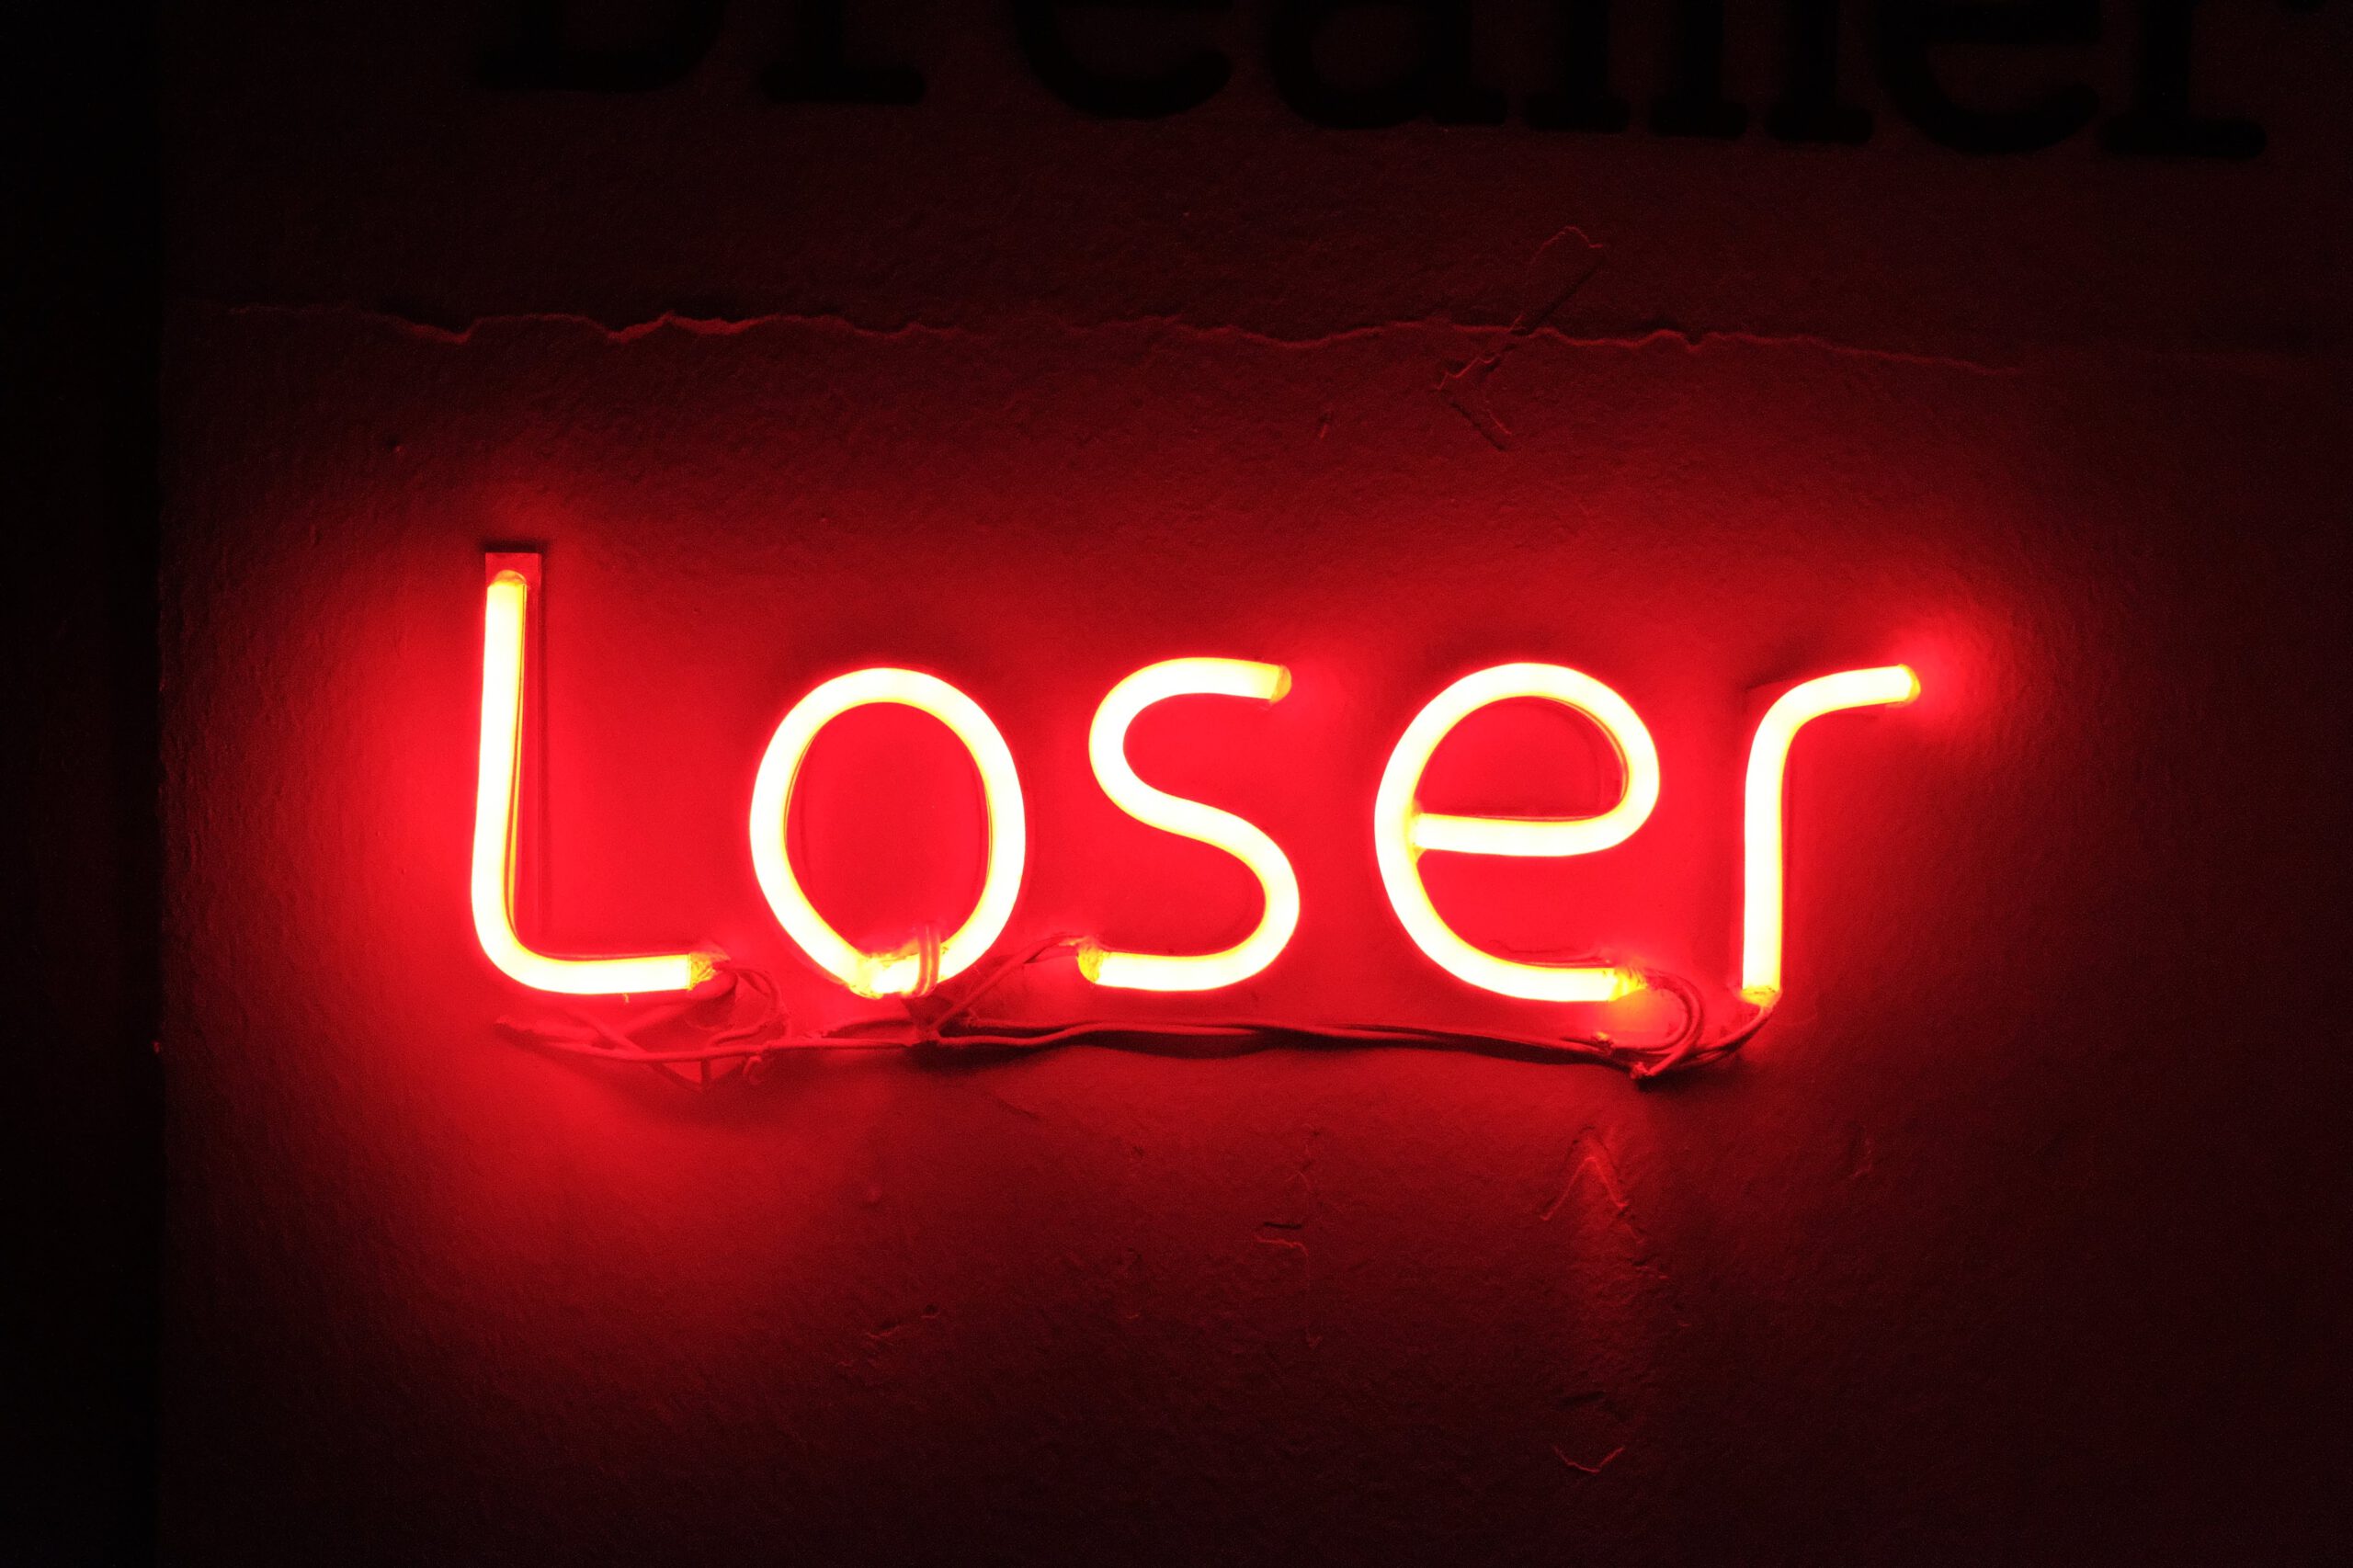 Dealing with Impostor Syndrome can make you feel like a loser - but it doesn't have to!